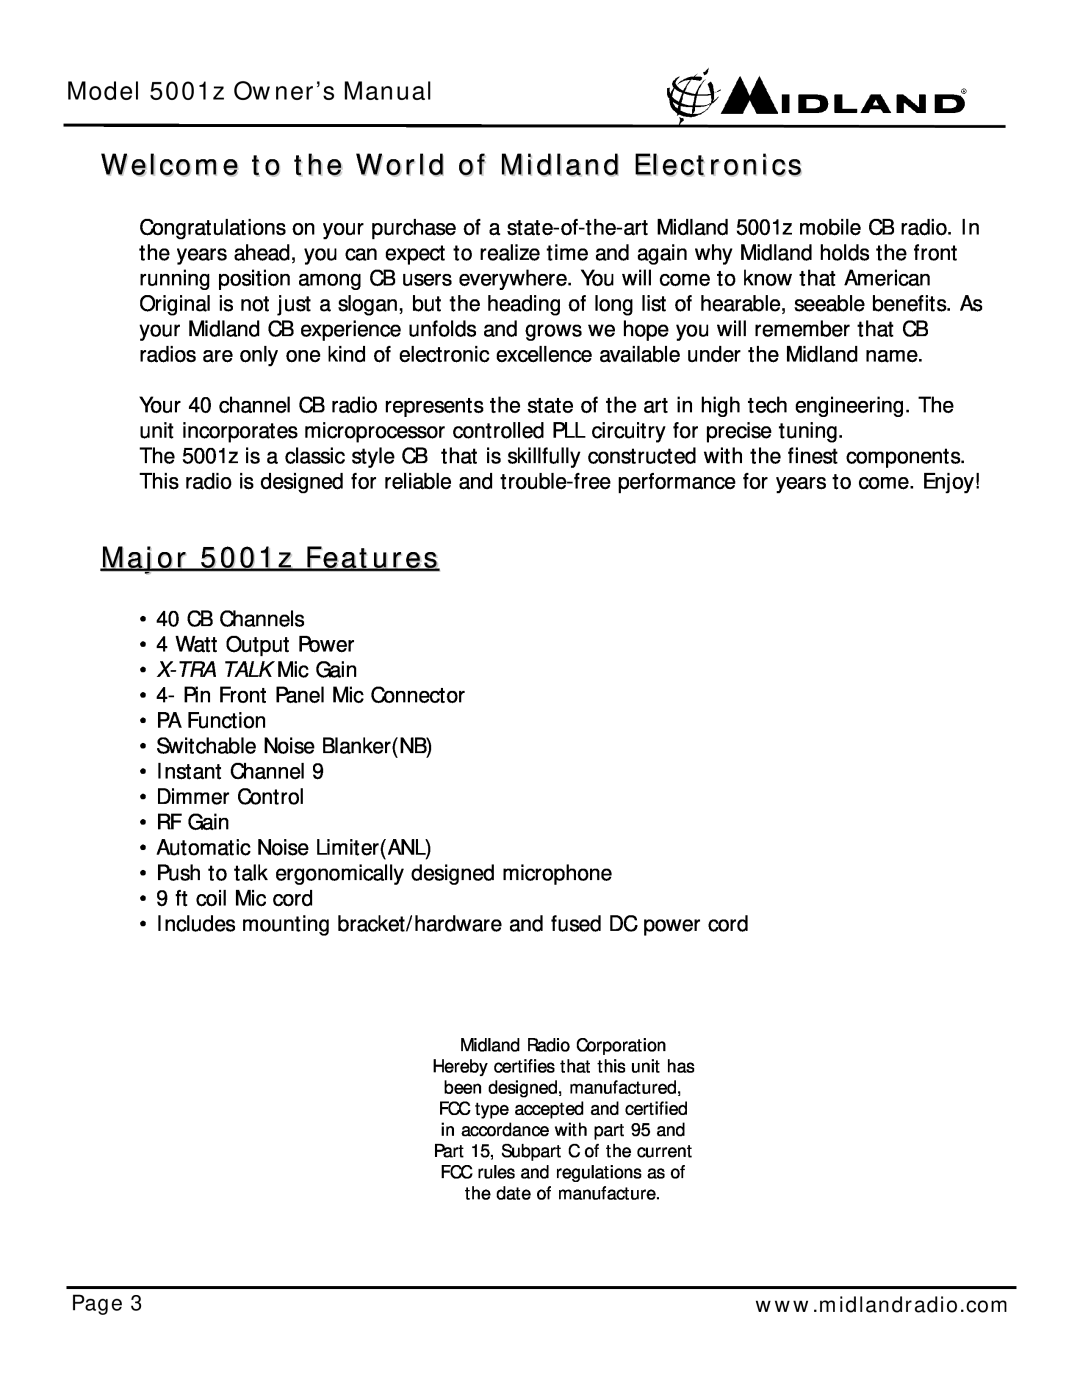 Midland Radio owner manual Welcome to the World of Midland Electronics, Major 5001z Features, X-TRATALK Mic Gain, Page 